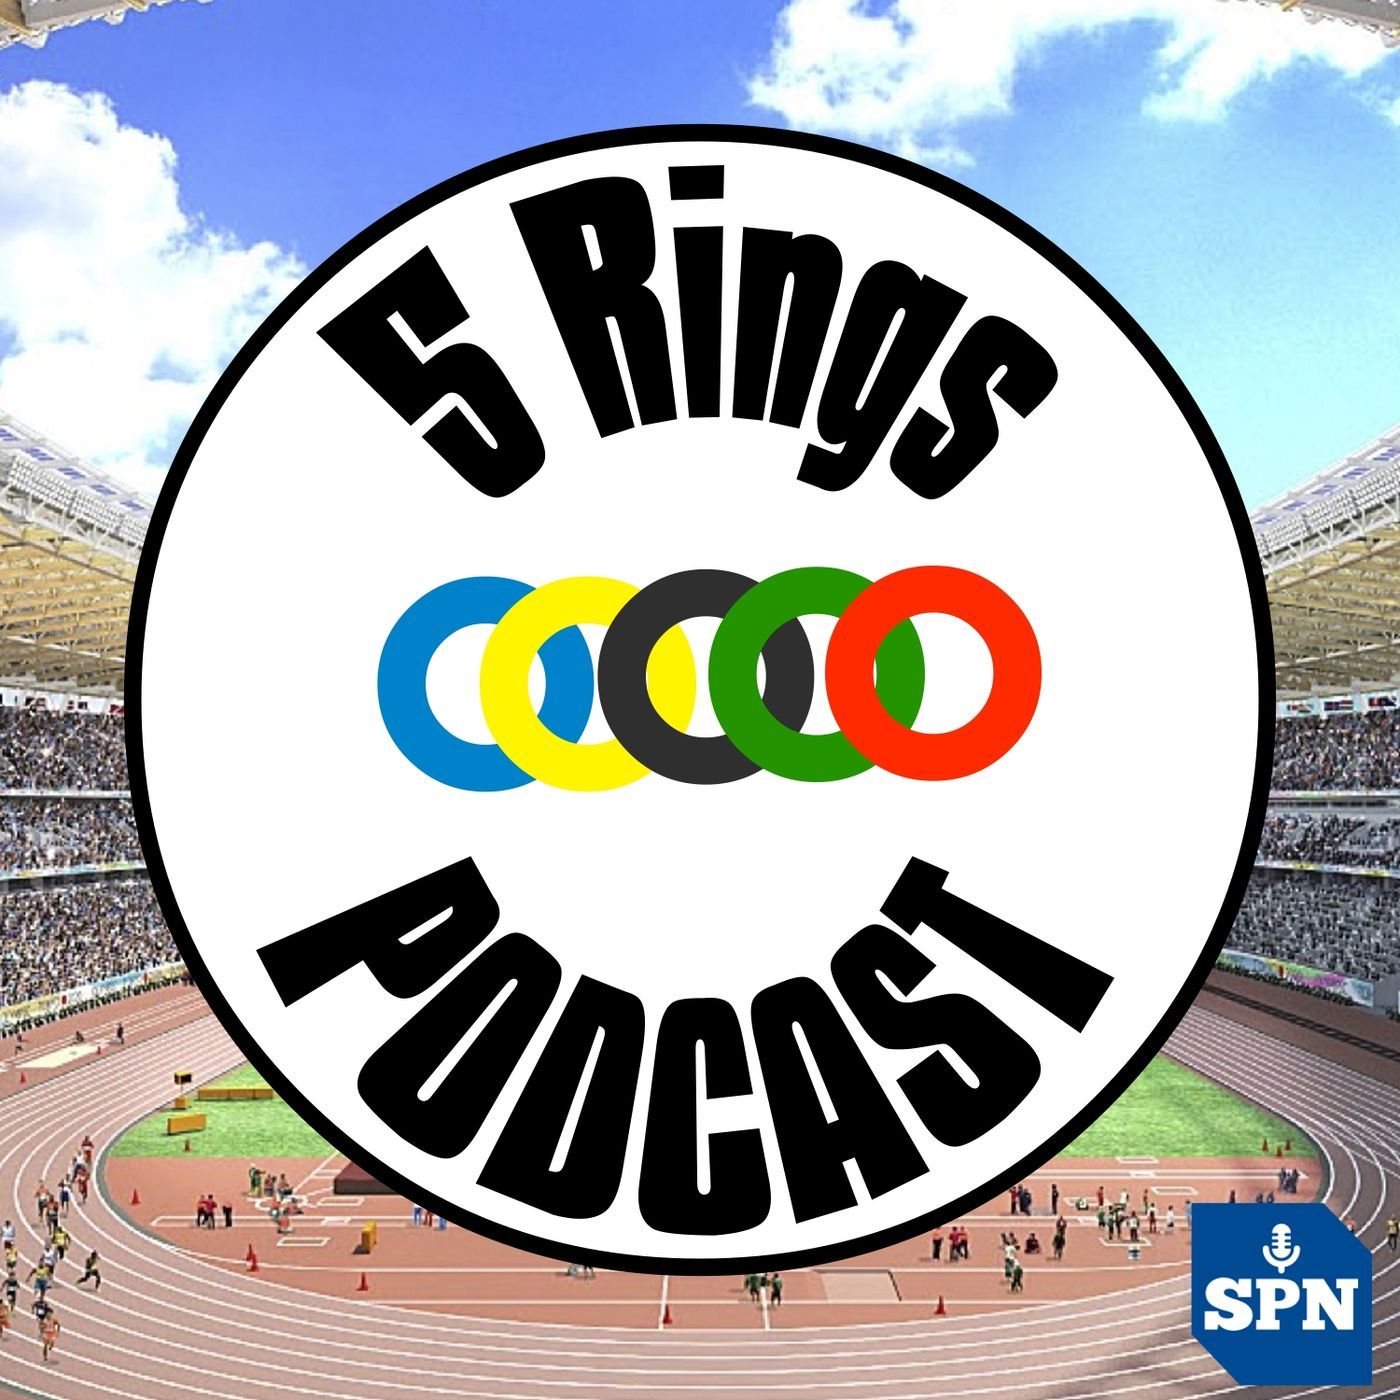 5 Rings Podcast - Daily Coverage of Tokyo 2020 with Kevin Laramee and Duane Rollins - Day 11 Review